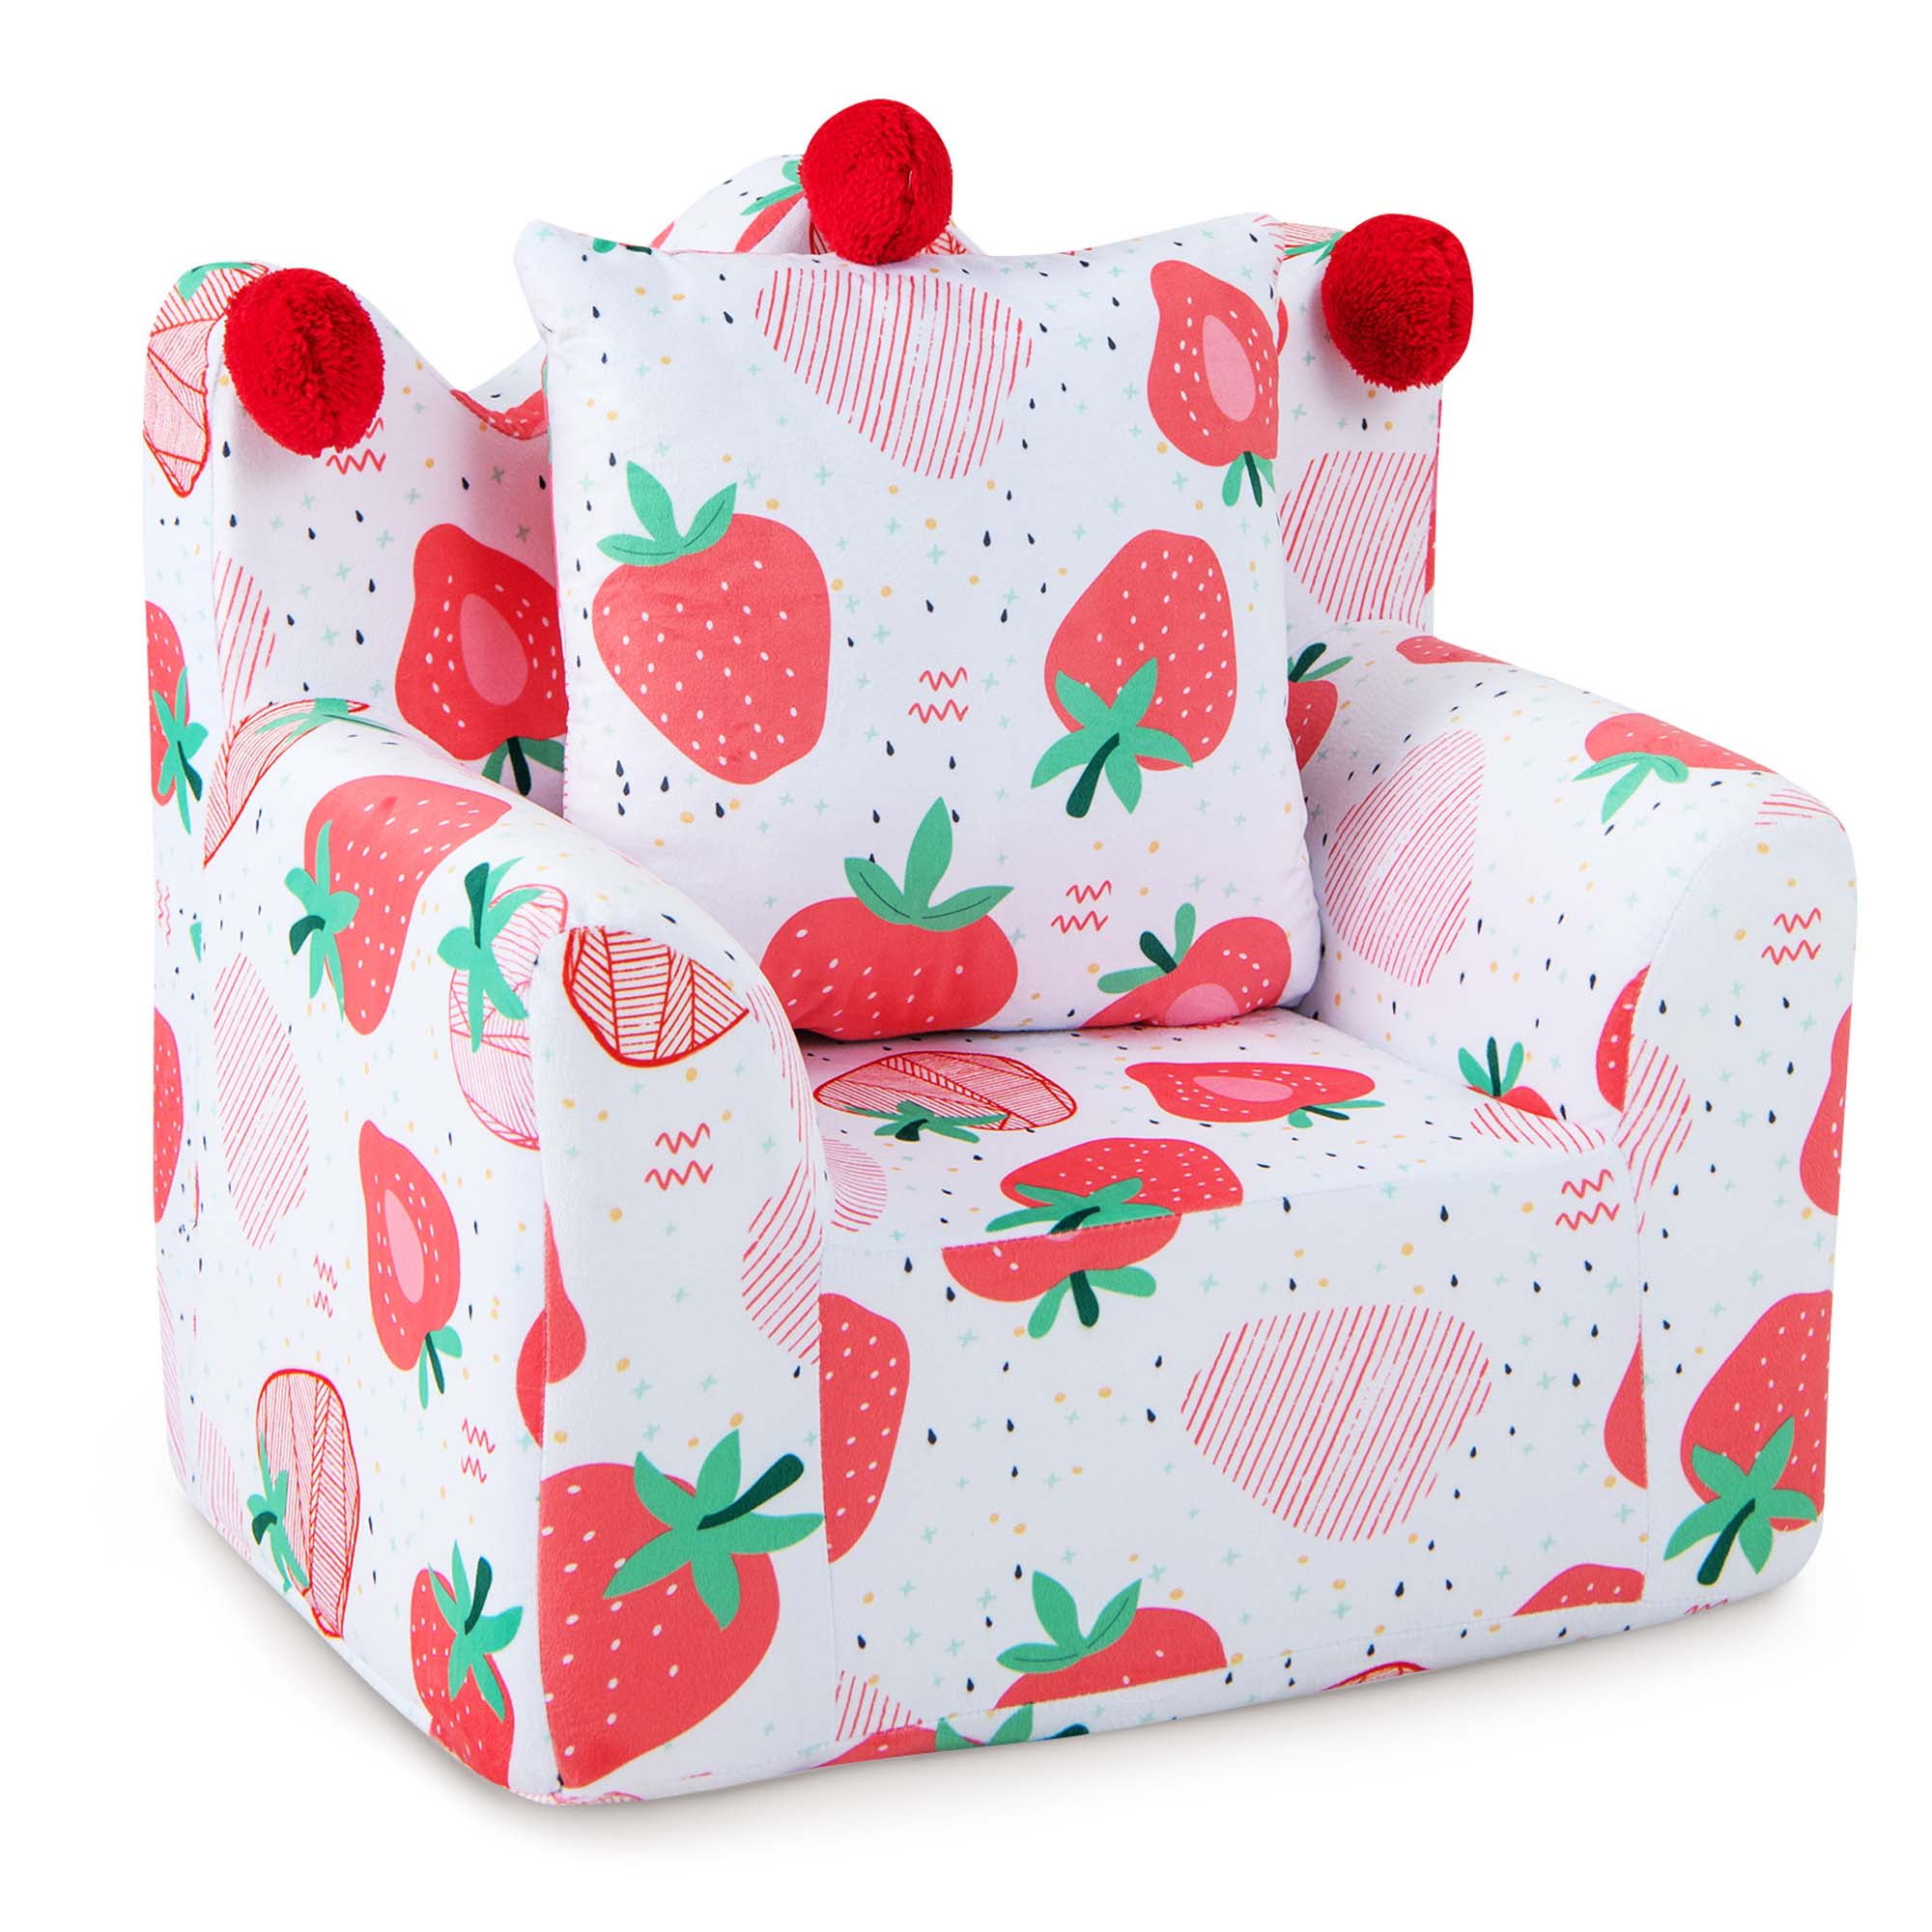 Costway Kids Sofa Chair Foam Filled Armchair Strawberry Toddler Couch With Cover Pillow D991edc5 124e 4b2e A3ad 497064d2654b.b498246590b0a4273f94018c103b0a0c 